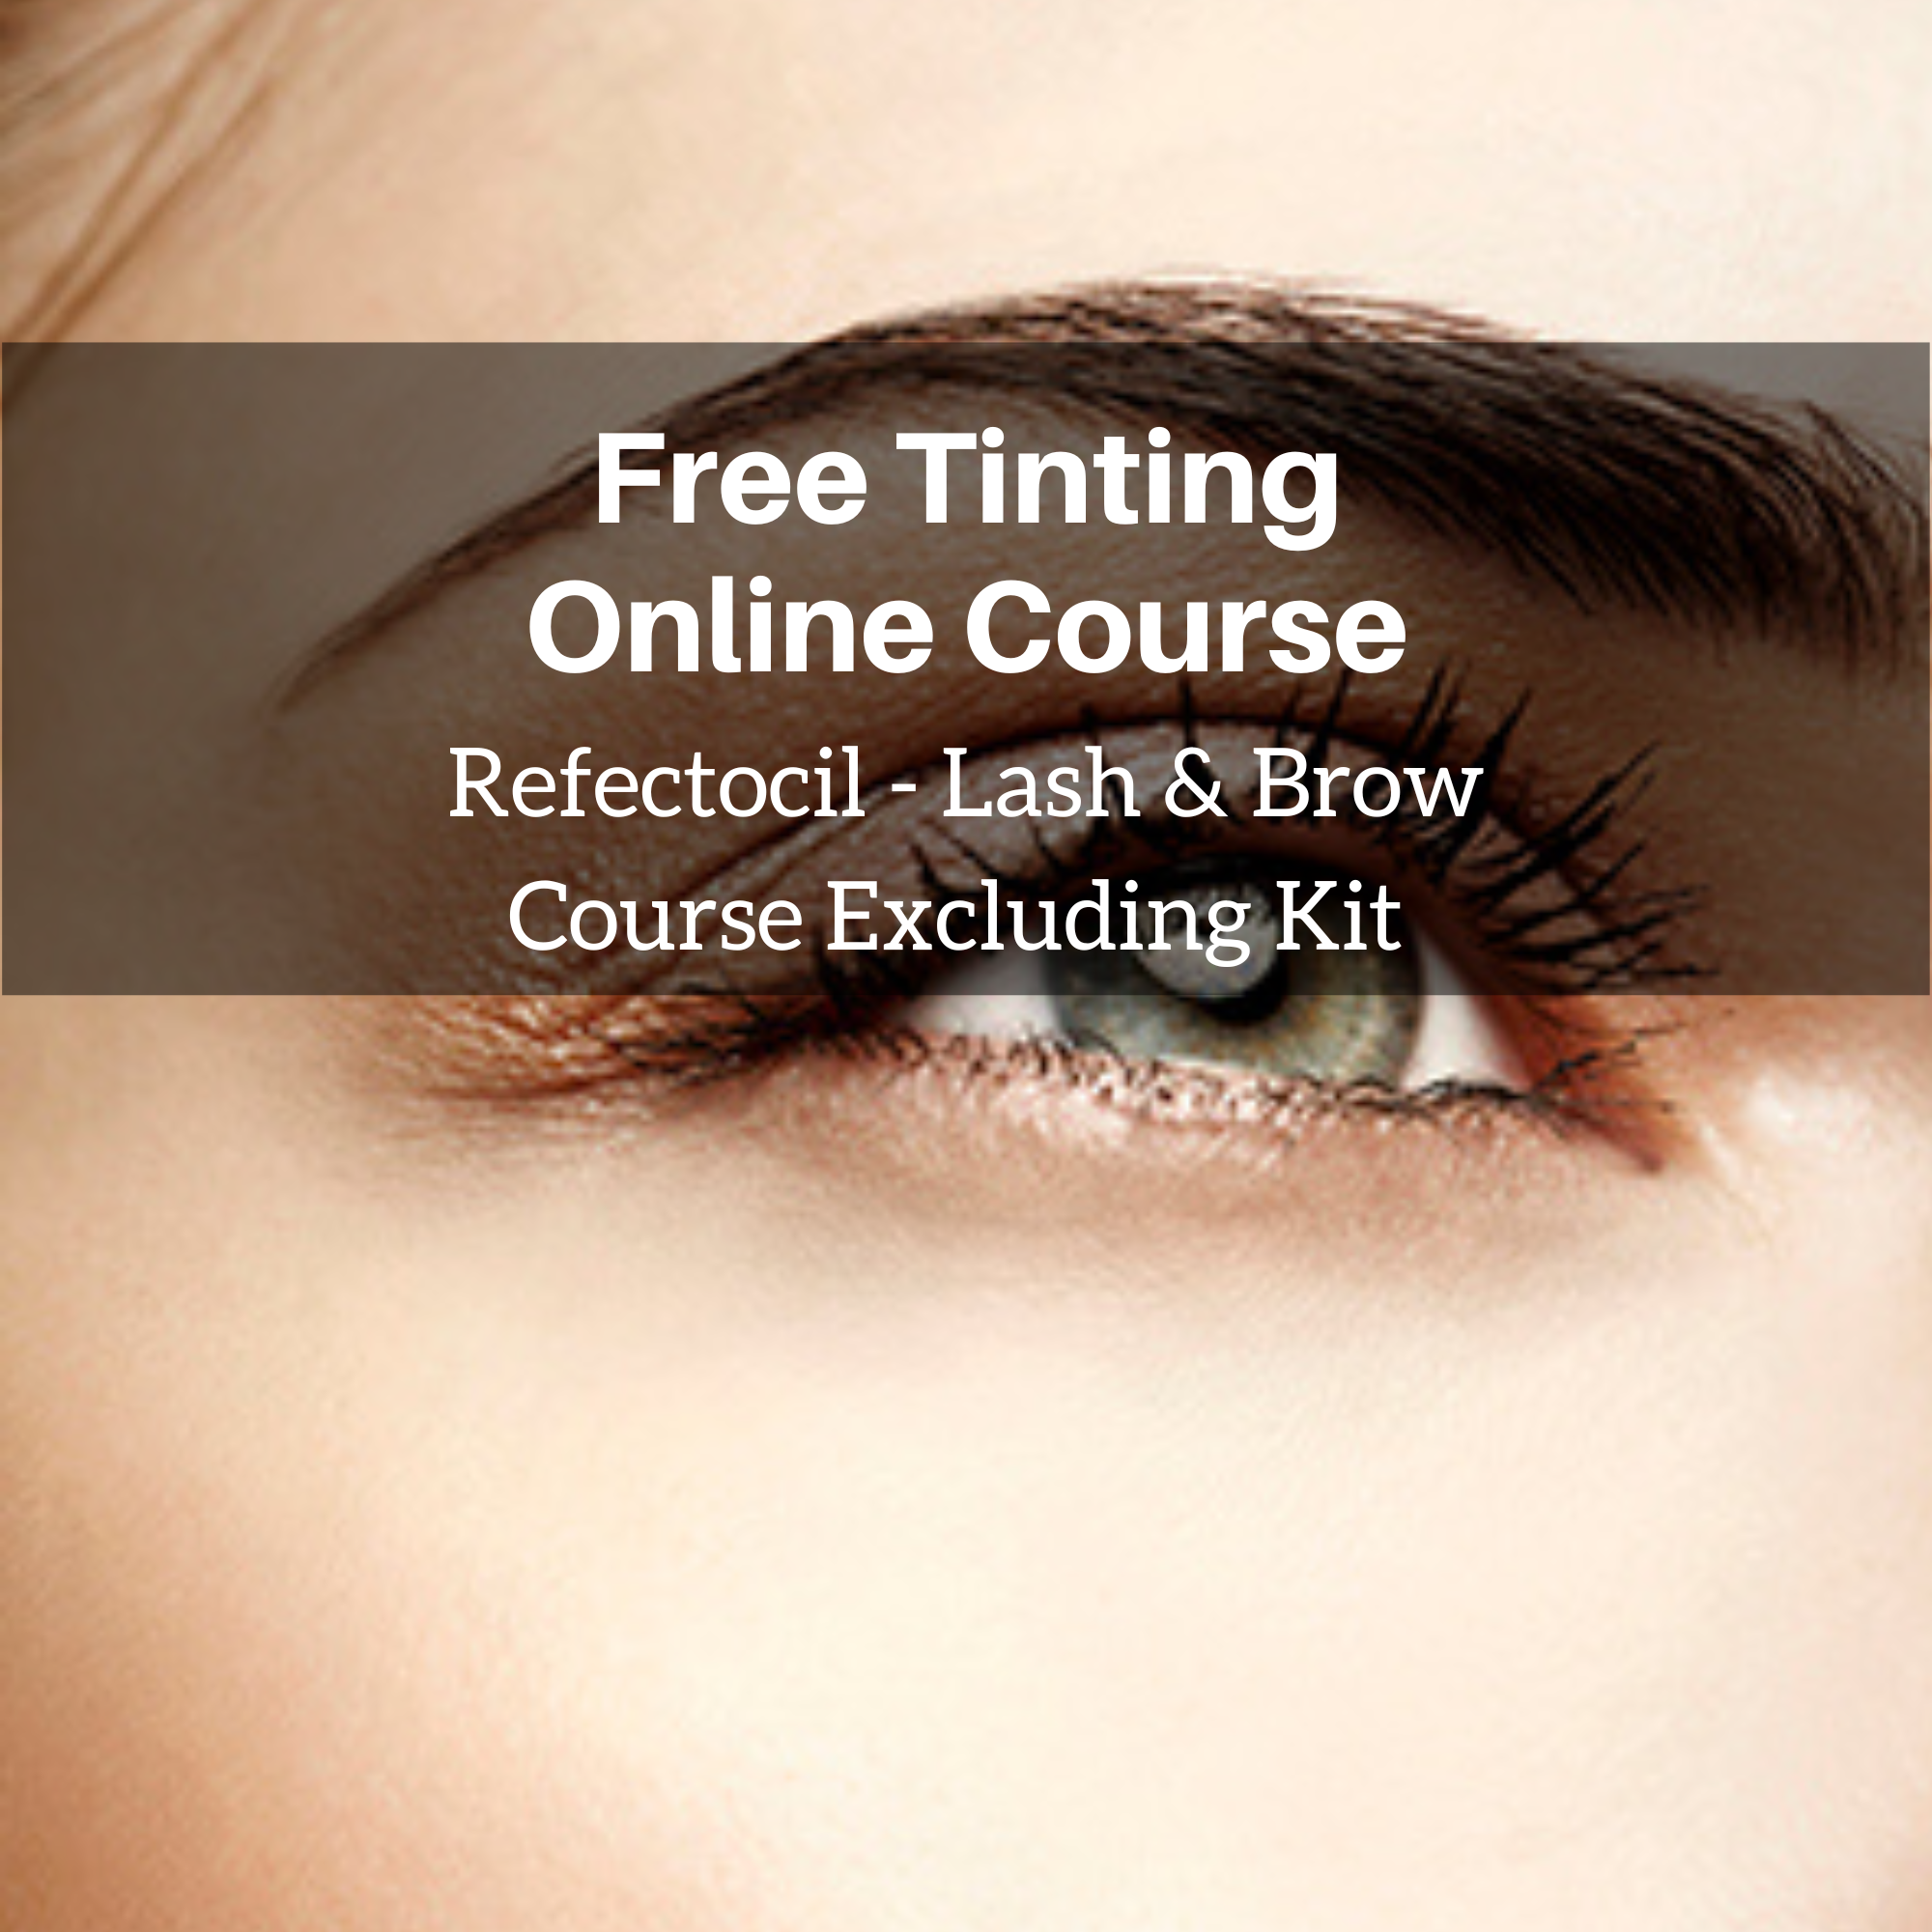 Tinting Course - Online Course